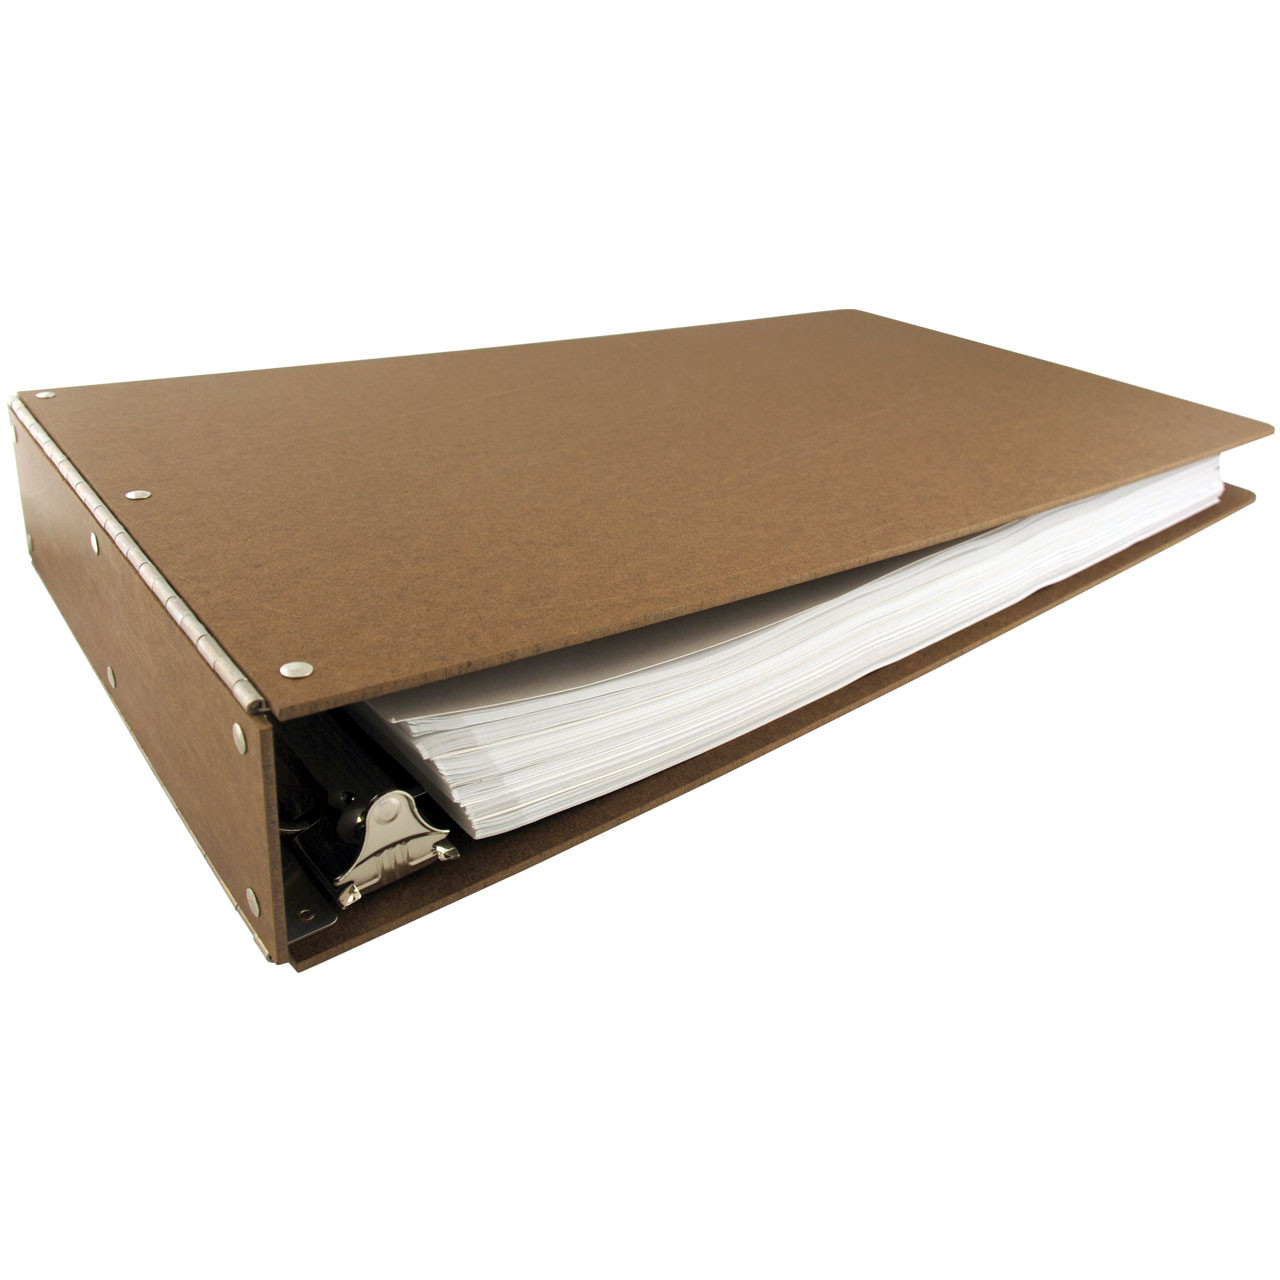 11x17 Binder Hardboard Panel Featuring a 2 Angle-D Ring Brown